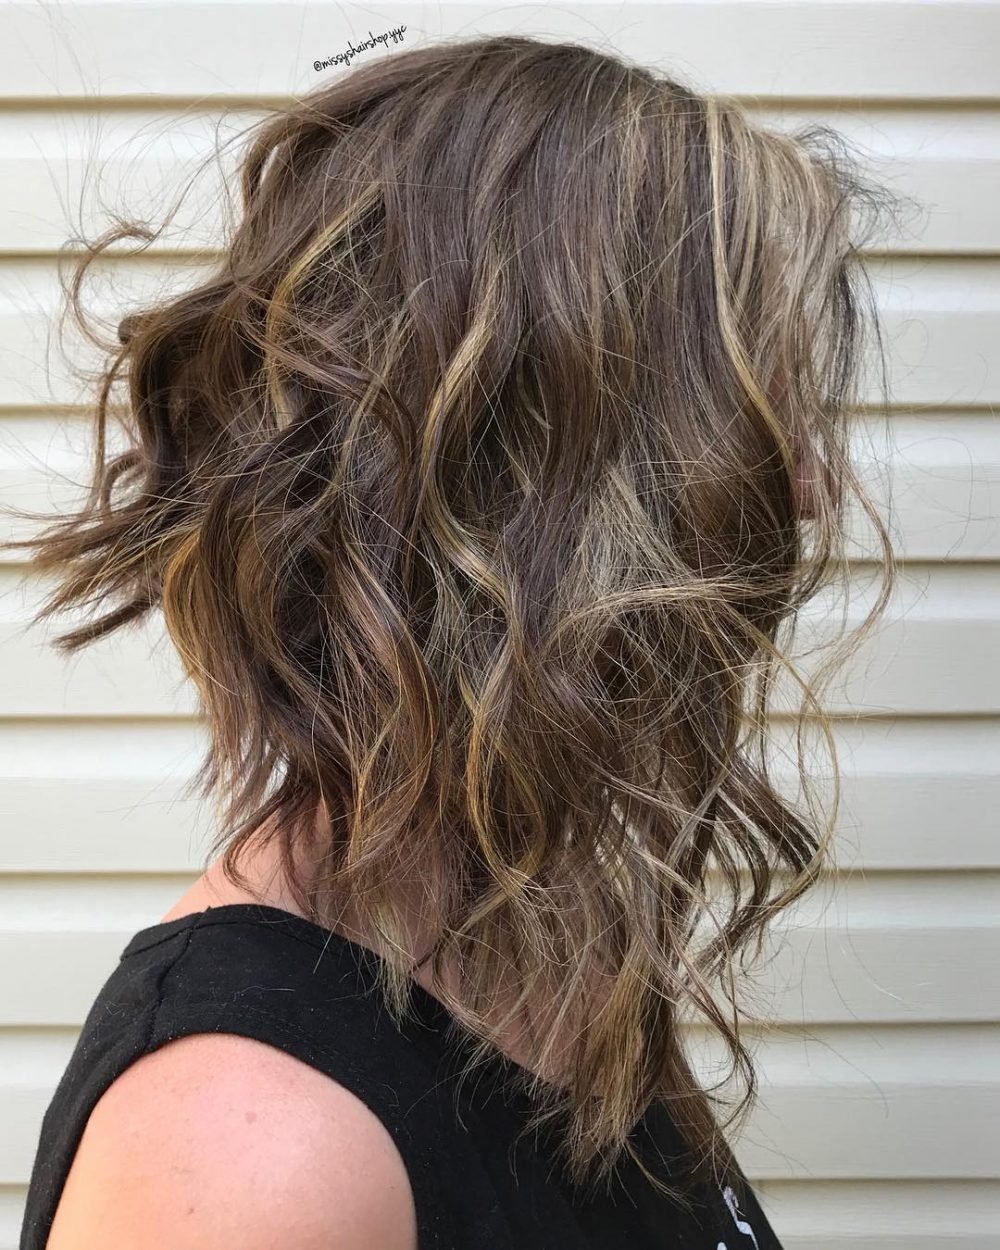 Medium-Length Stacked Cut in Messy Style